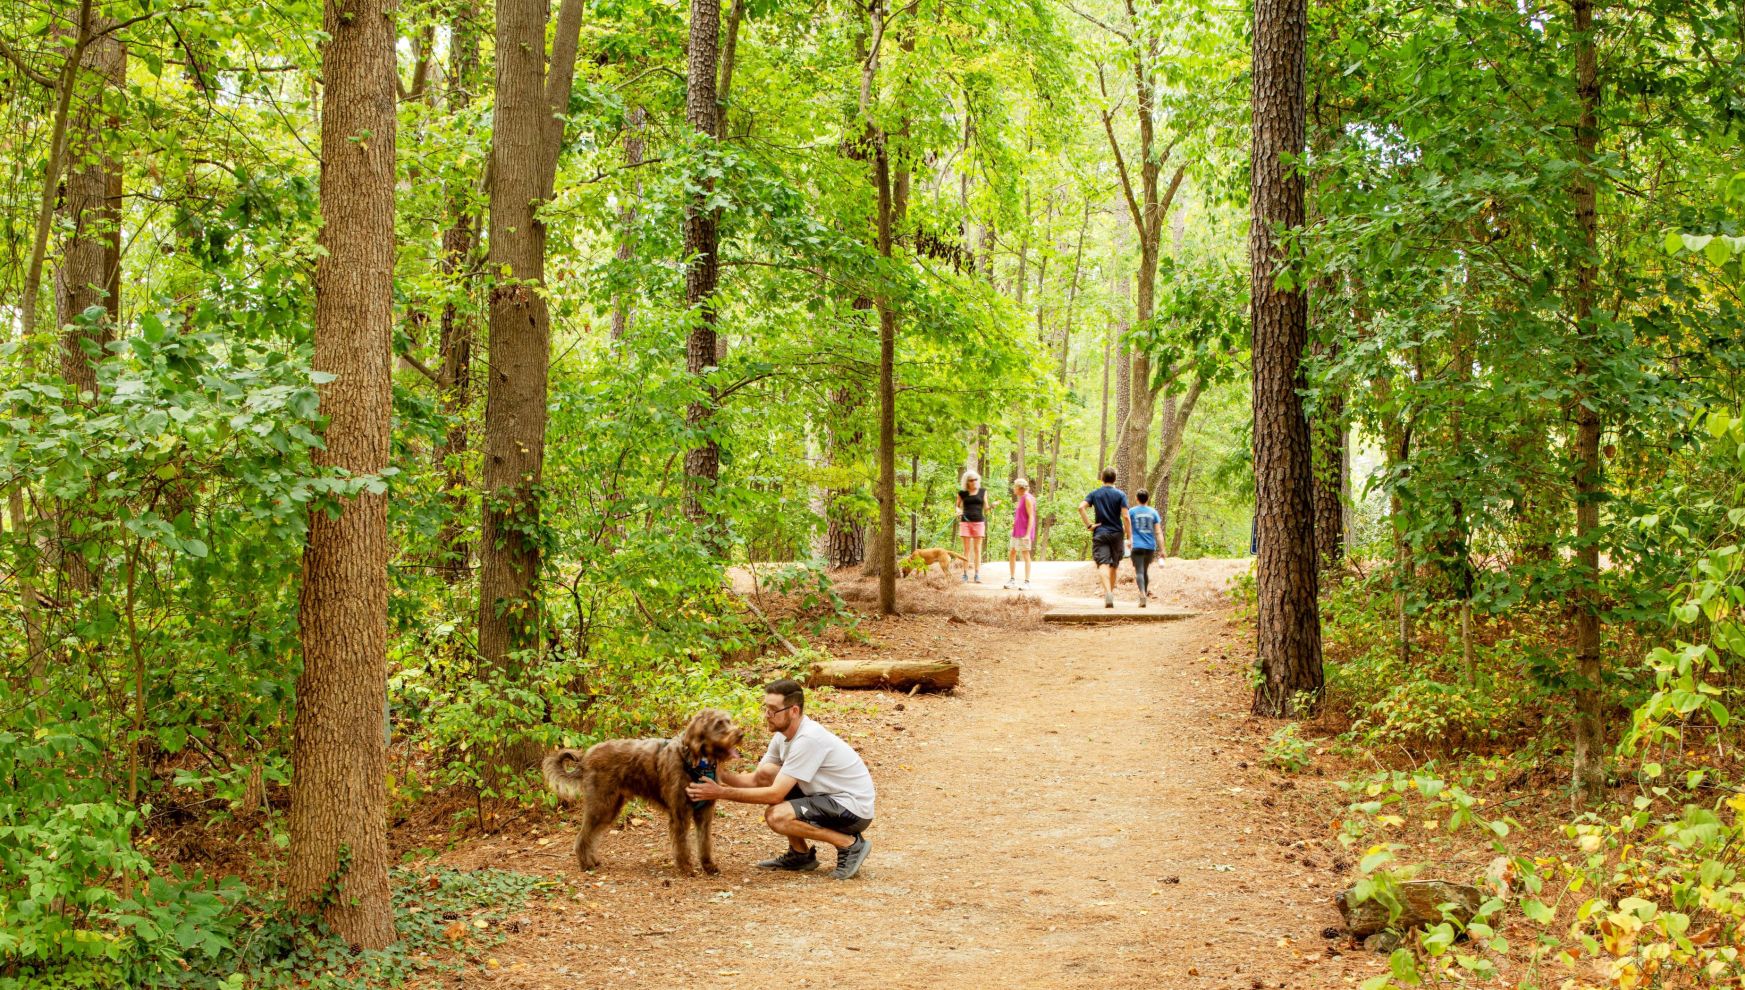 A Group Of People Walking On A Trail In The Woods